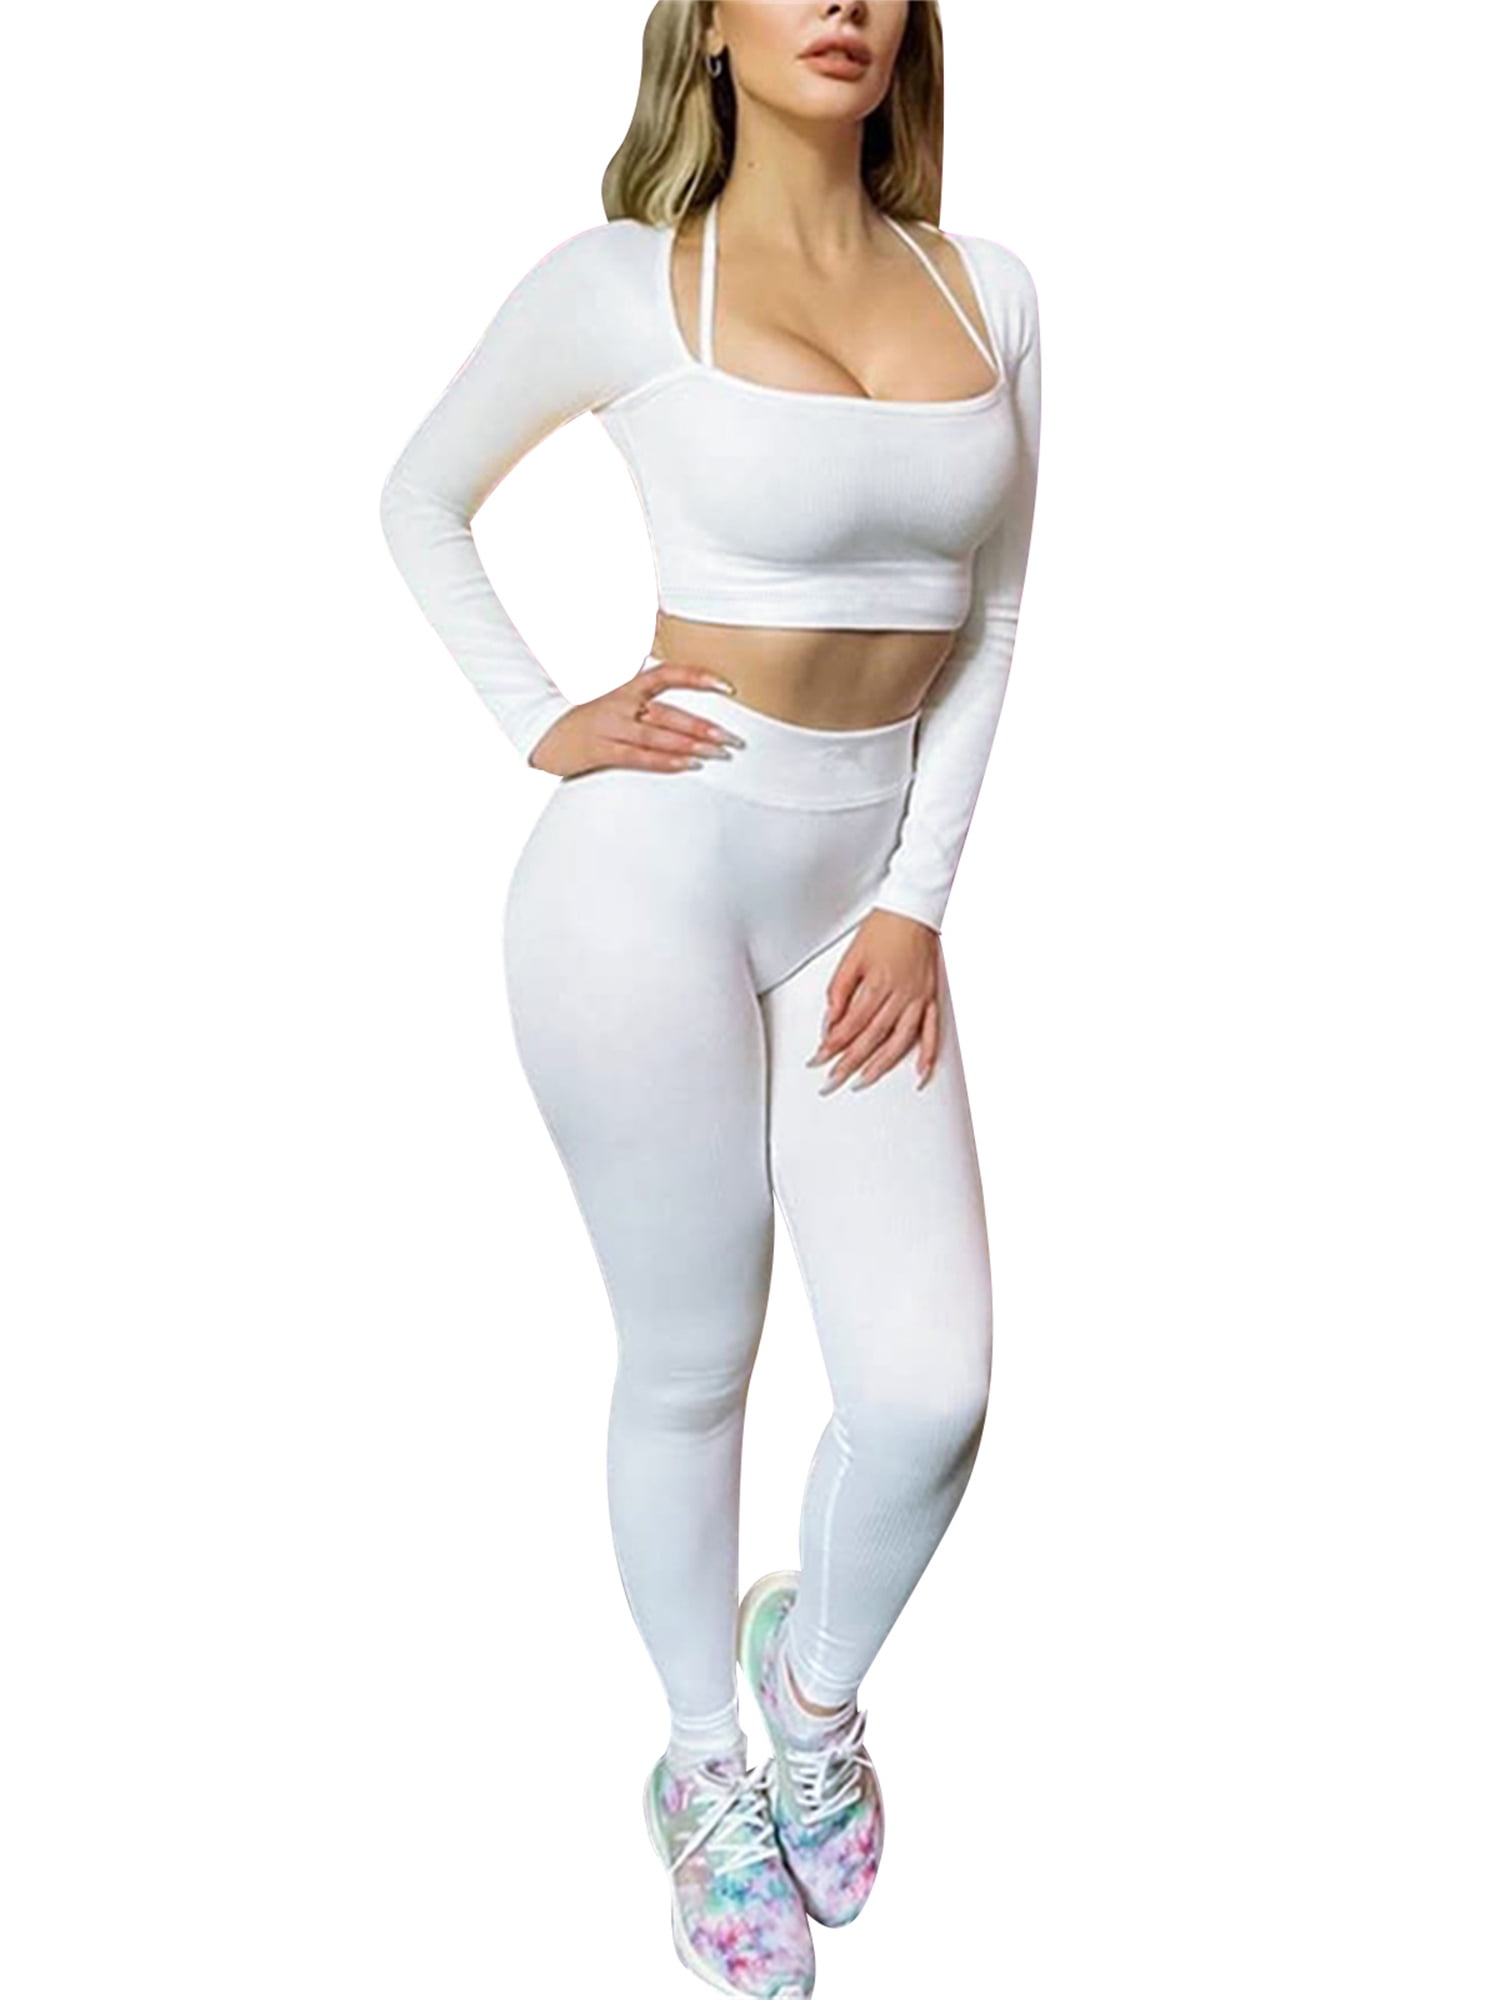 xingqing Seamless Workout Outfits for Women 2 Piece Ribbed Long Sleeve Crop  Top Tummy Control Leggings Sets Creamy L 